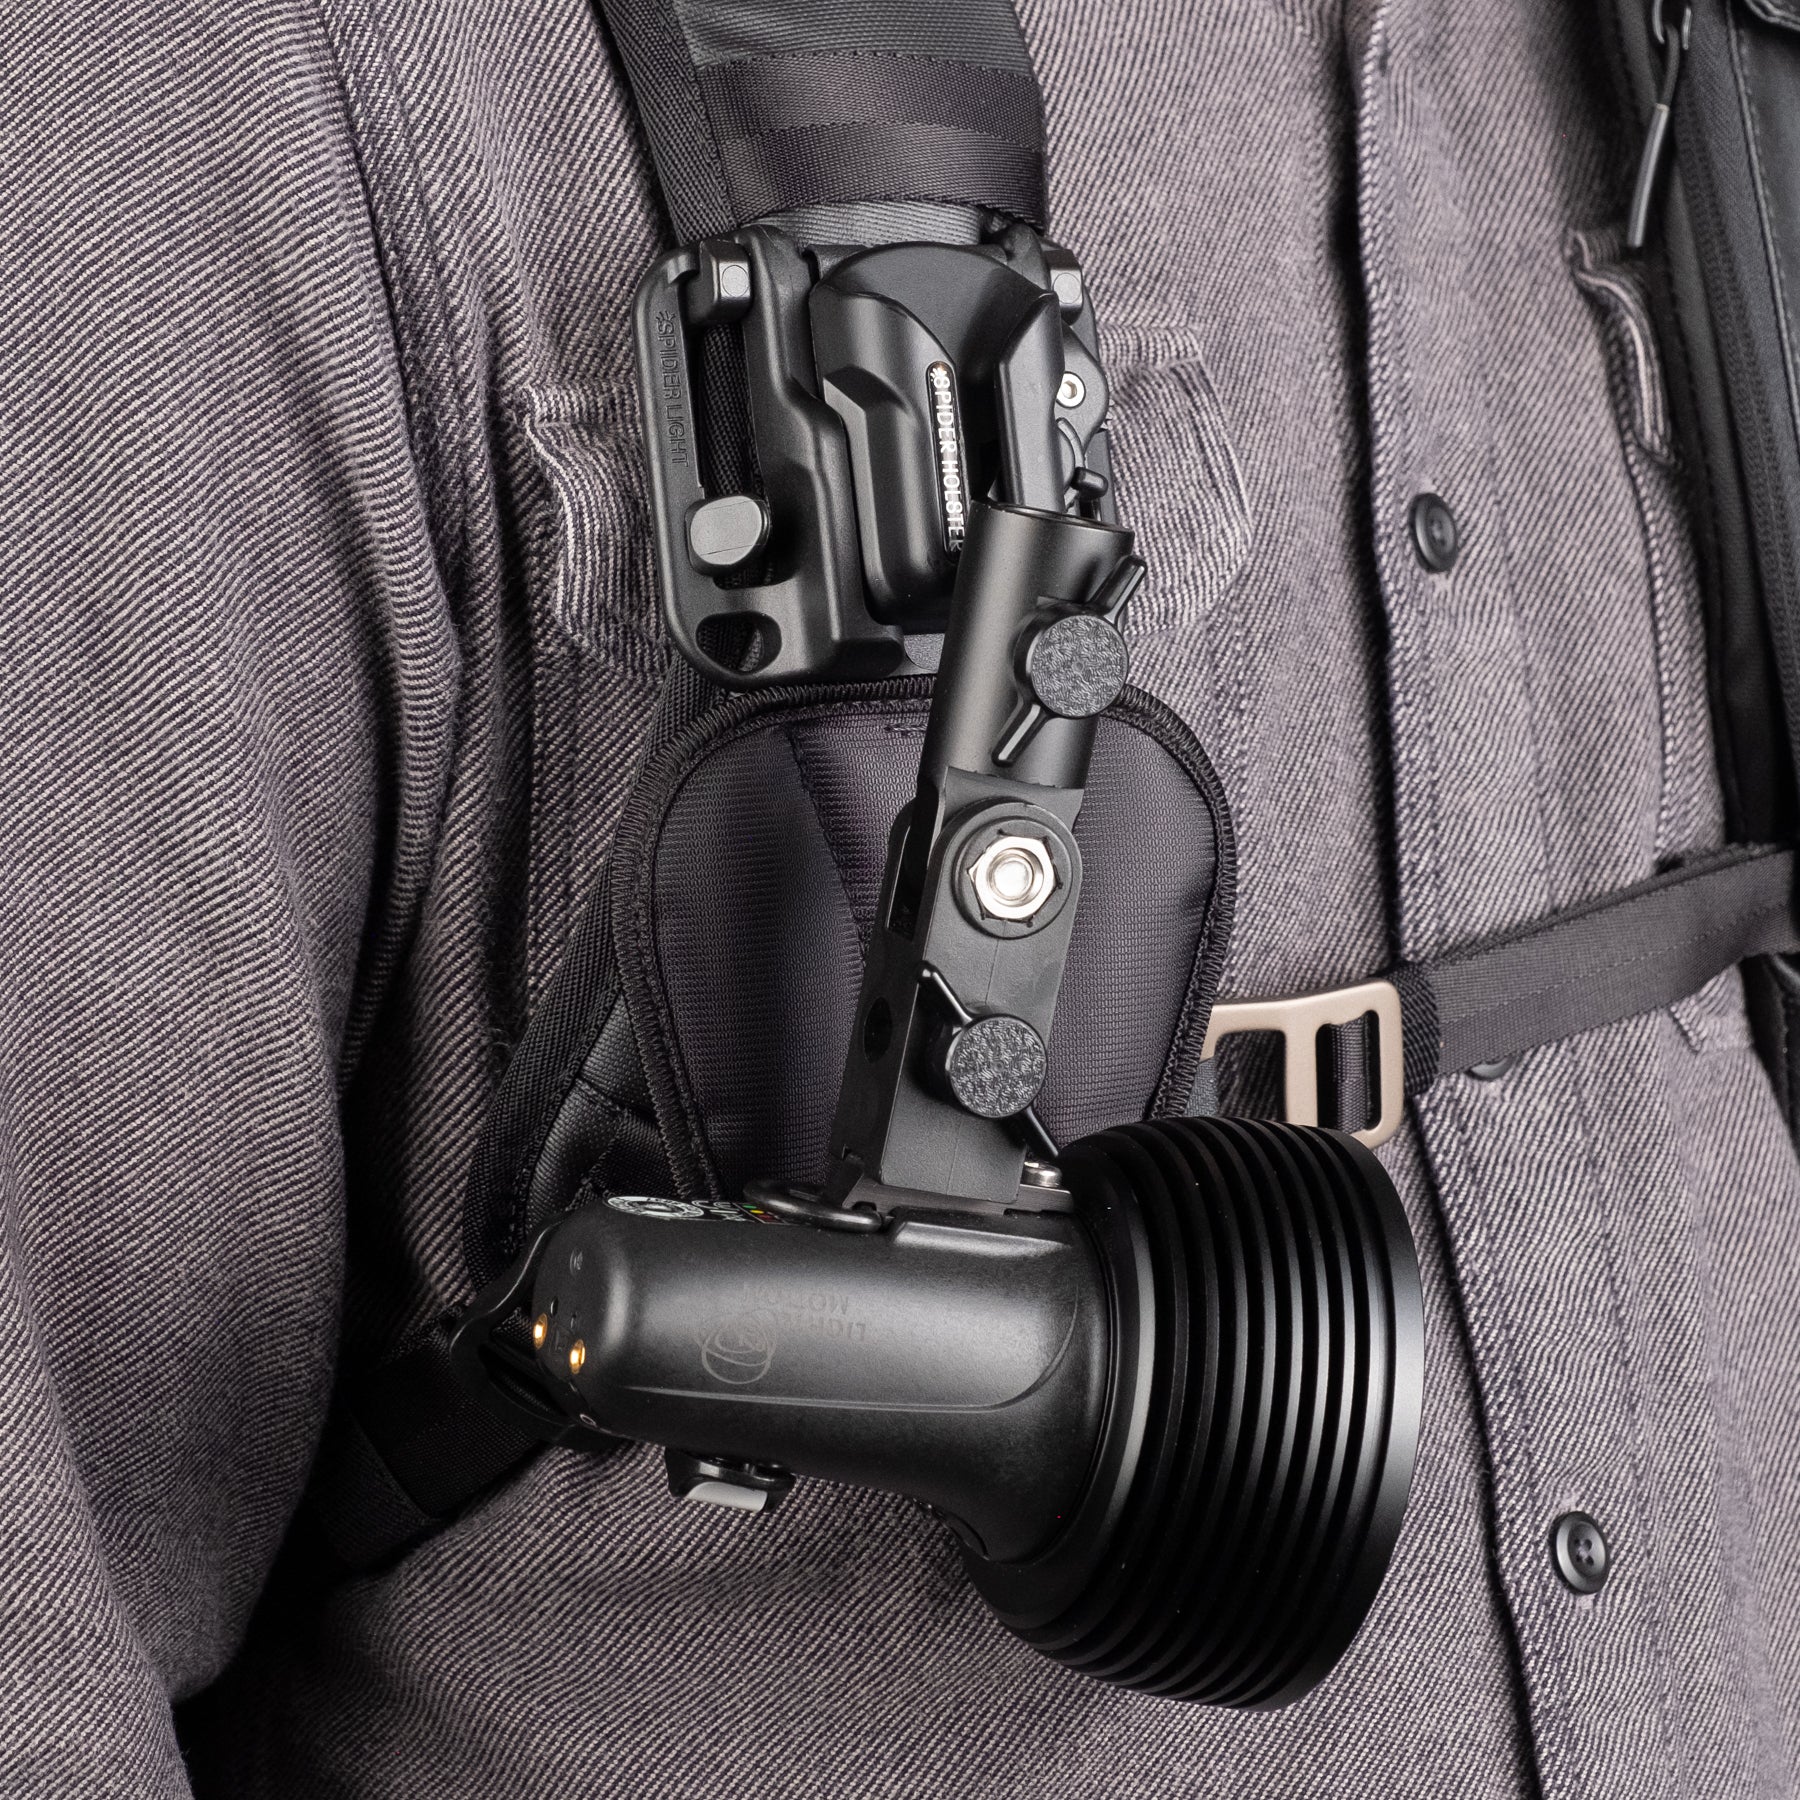 195LM: Spider-X Backpack Holster + Accessory Pin Kit